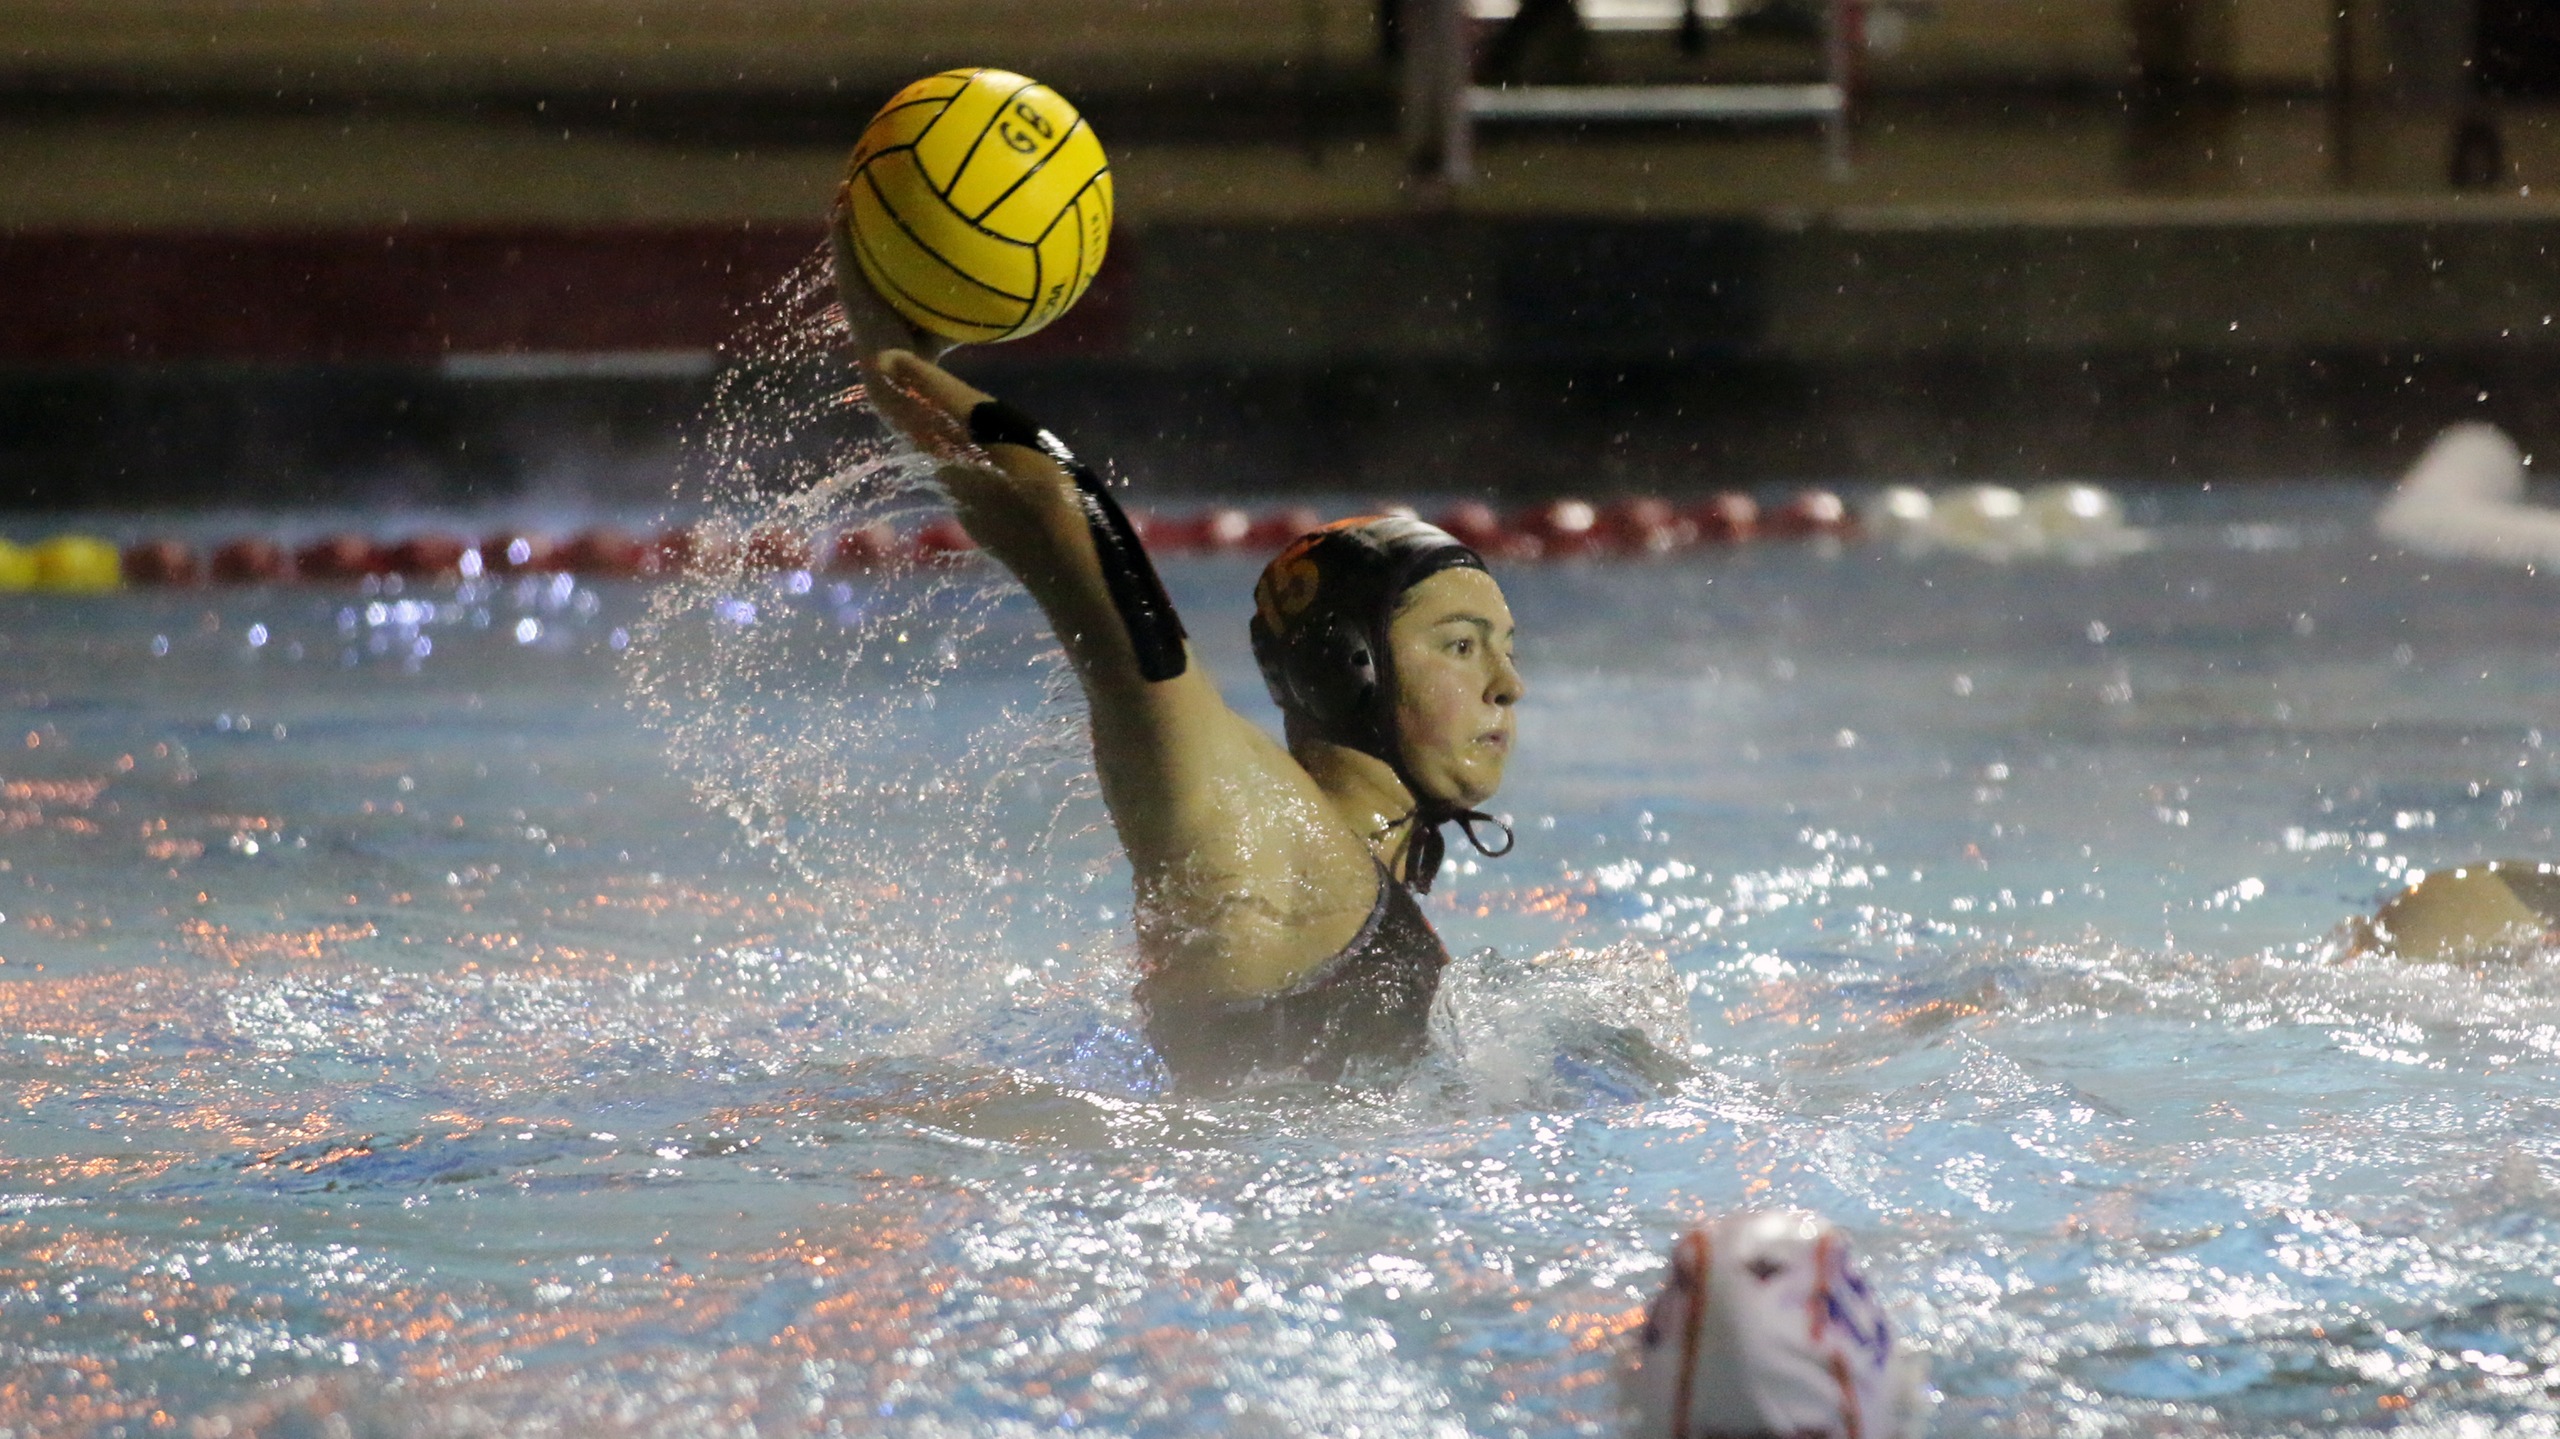 Isabel Del Villar led CMS with five goals (photo by Thomas Walker)